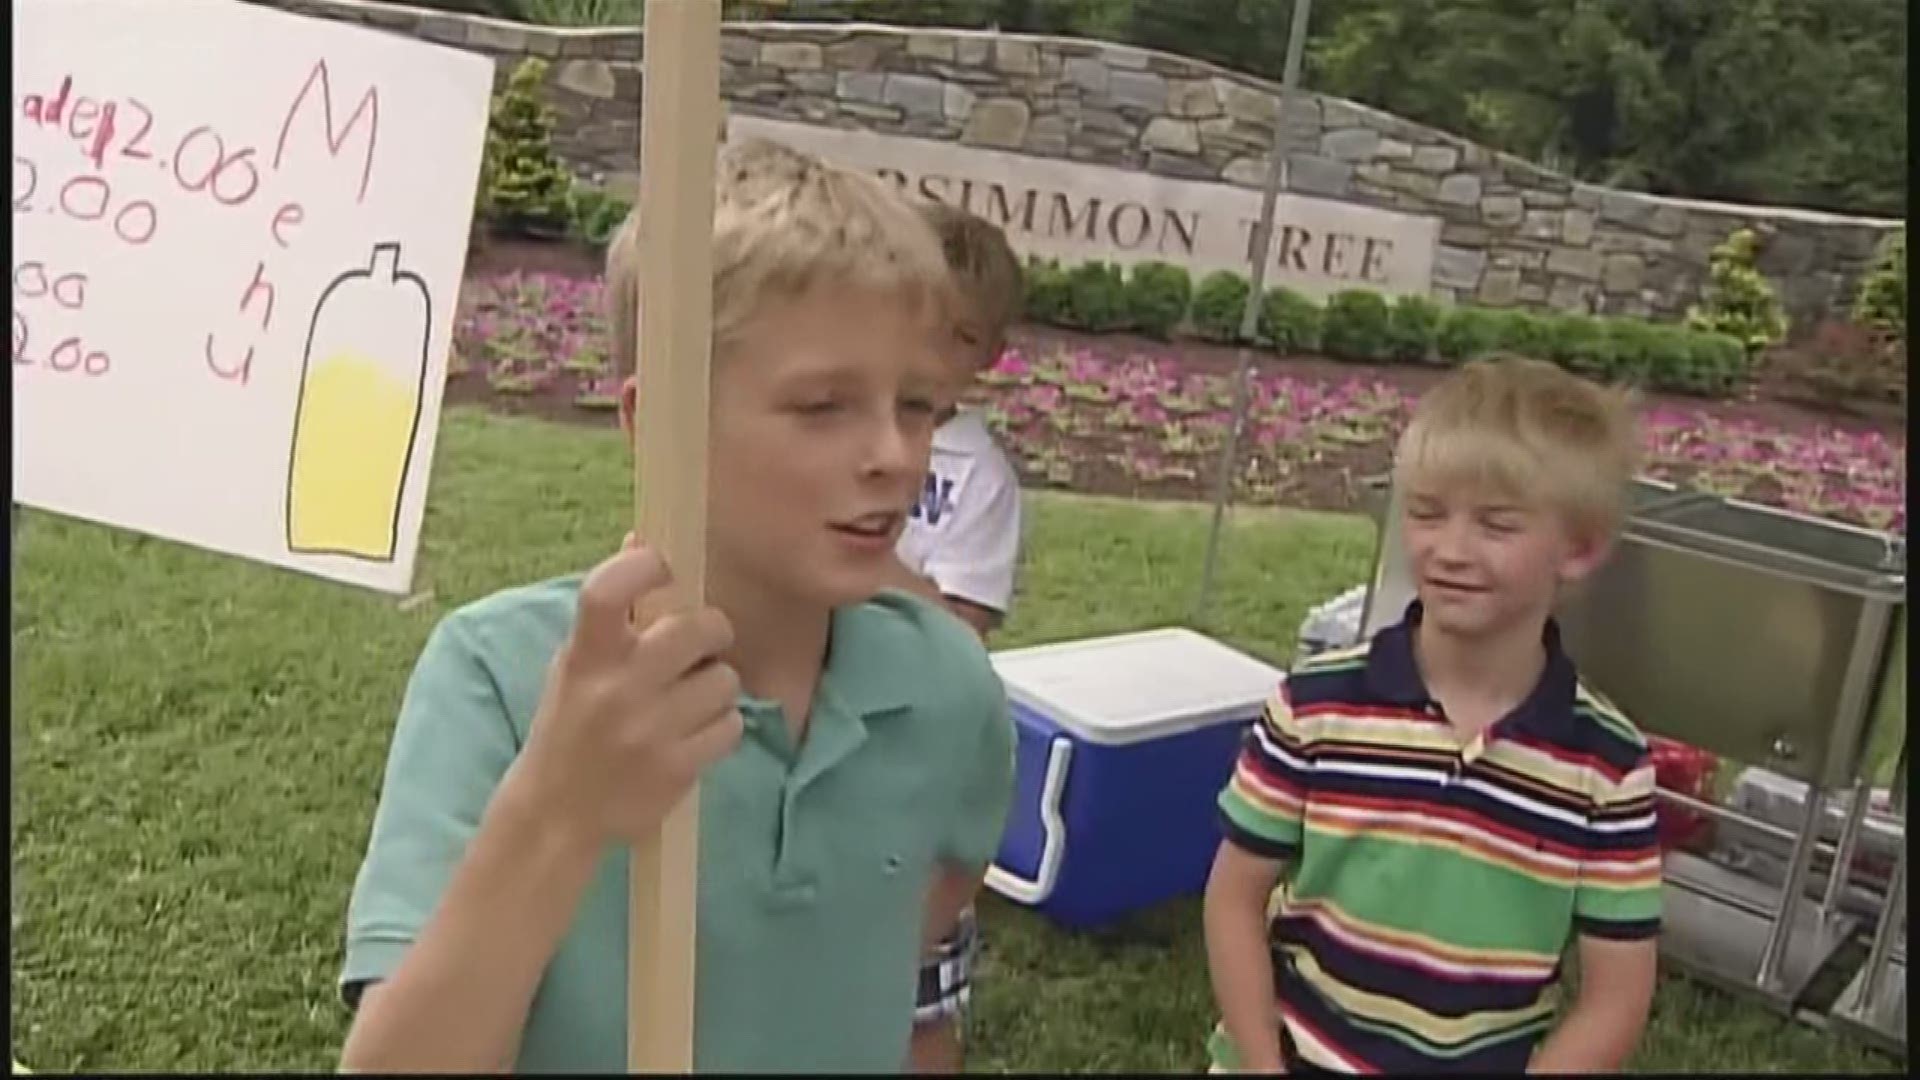 A decade ago, a bunch of Bethesda kids were fined $500 for running a lemonade stand at their grandpa's house. This year, they convinced lawmakers to change the law.